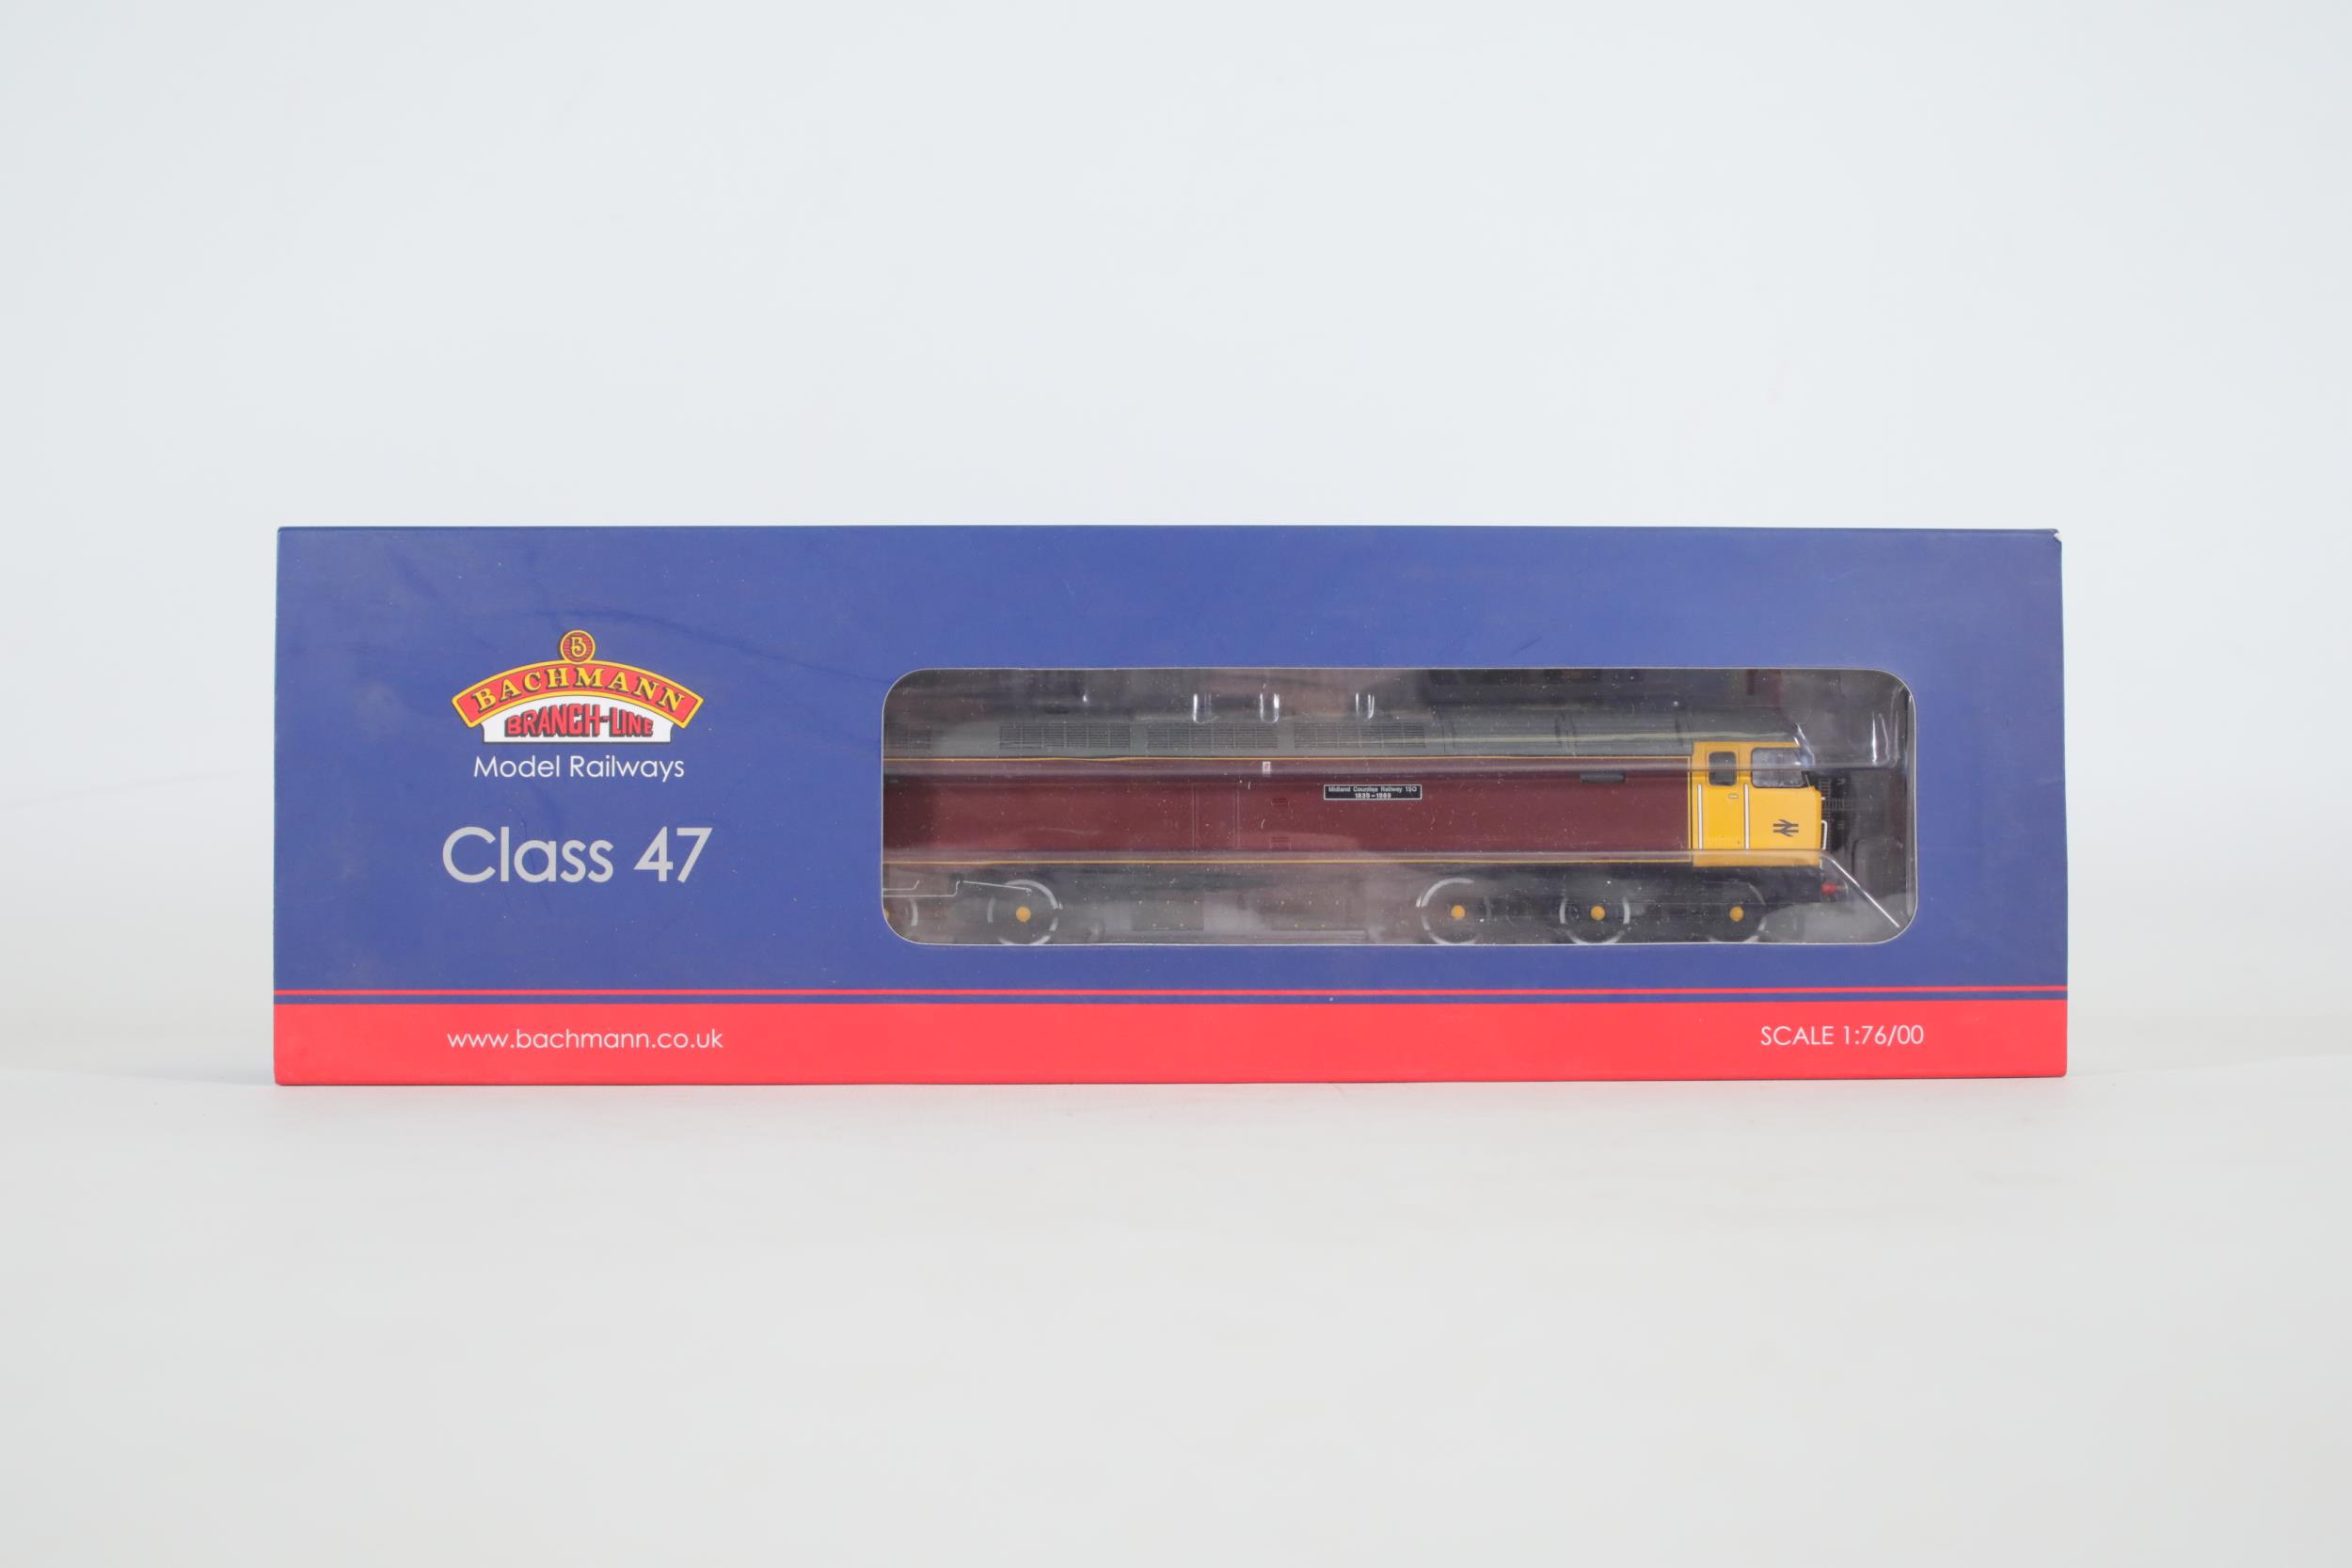 Bachmann Class 47 47973 Midland Counties Locomotive Boxed - Image 5 of 8